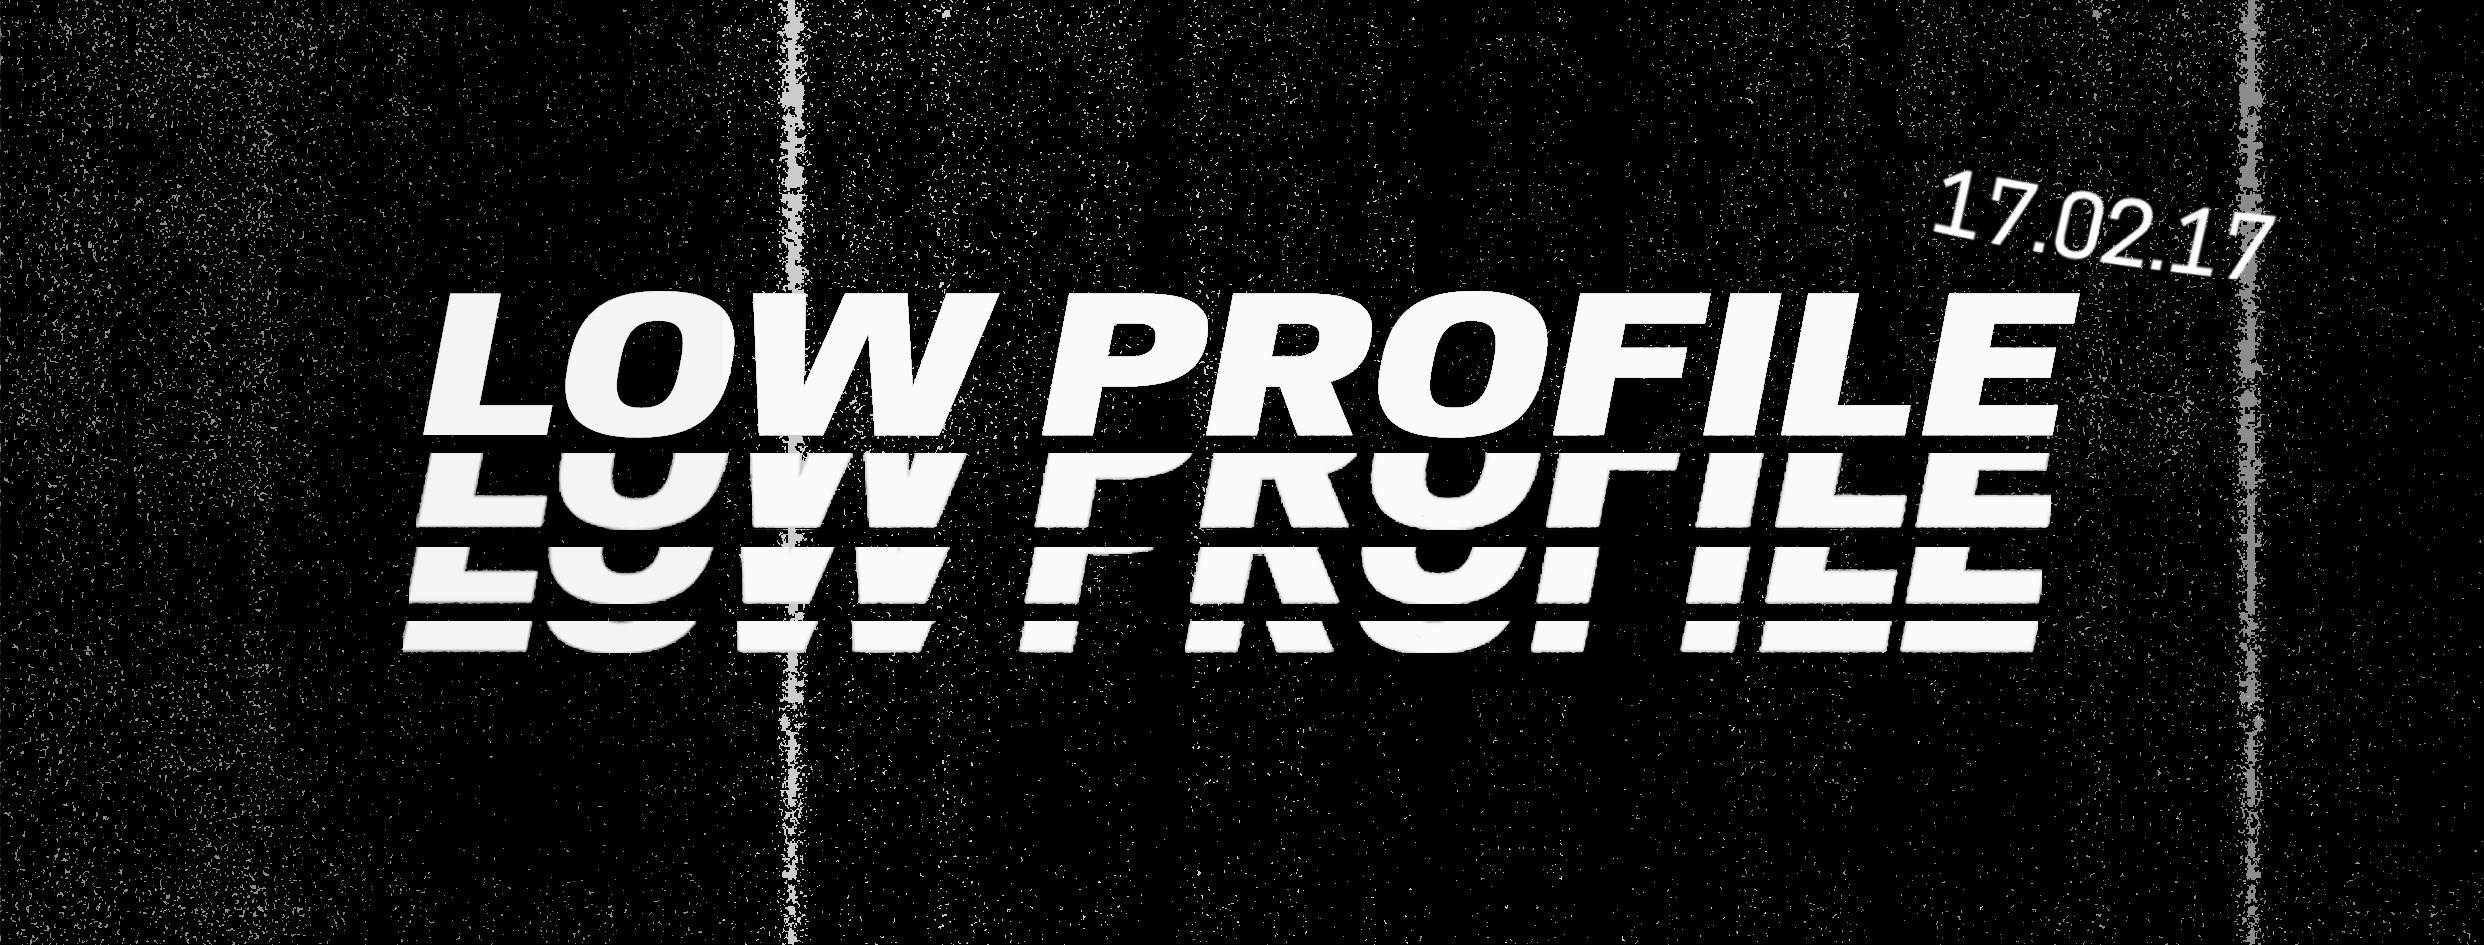 Low Profile with Meze & Myn - フライヤー表